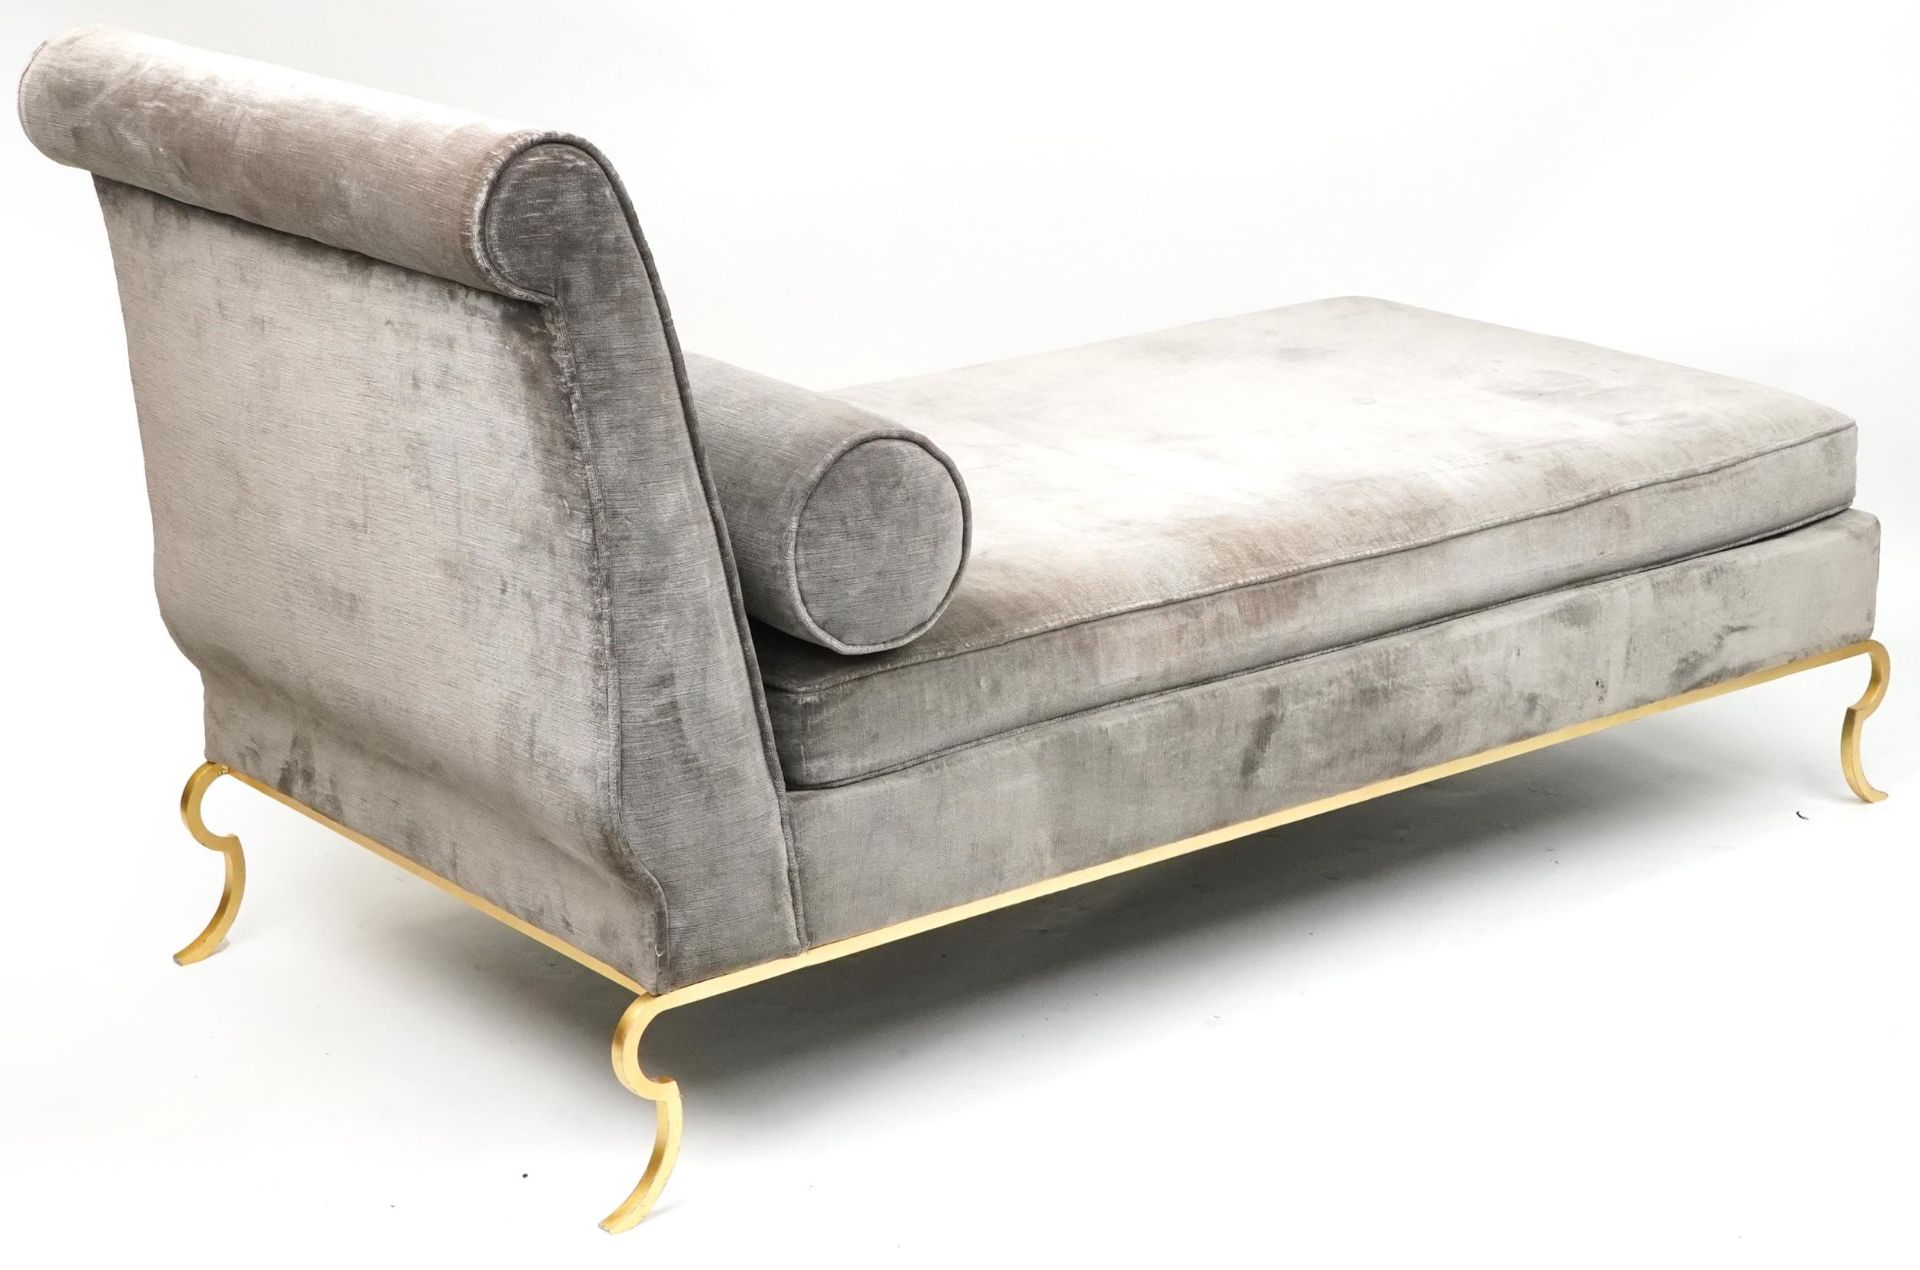 Contemporary grey upholstered chaise longue with gilt metal frame, 91cm H x 175cm W x 77cm D - Image 3 of 3